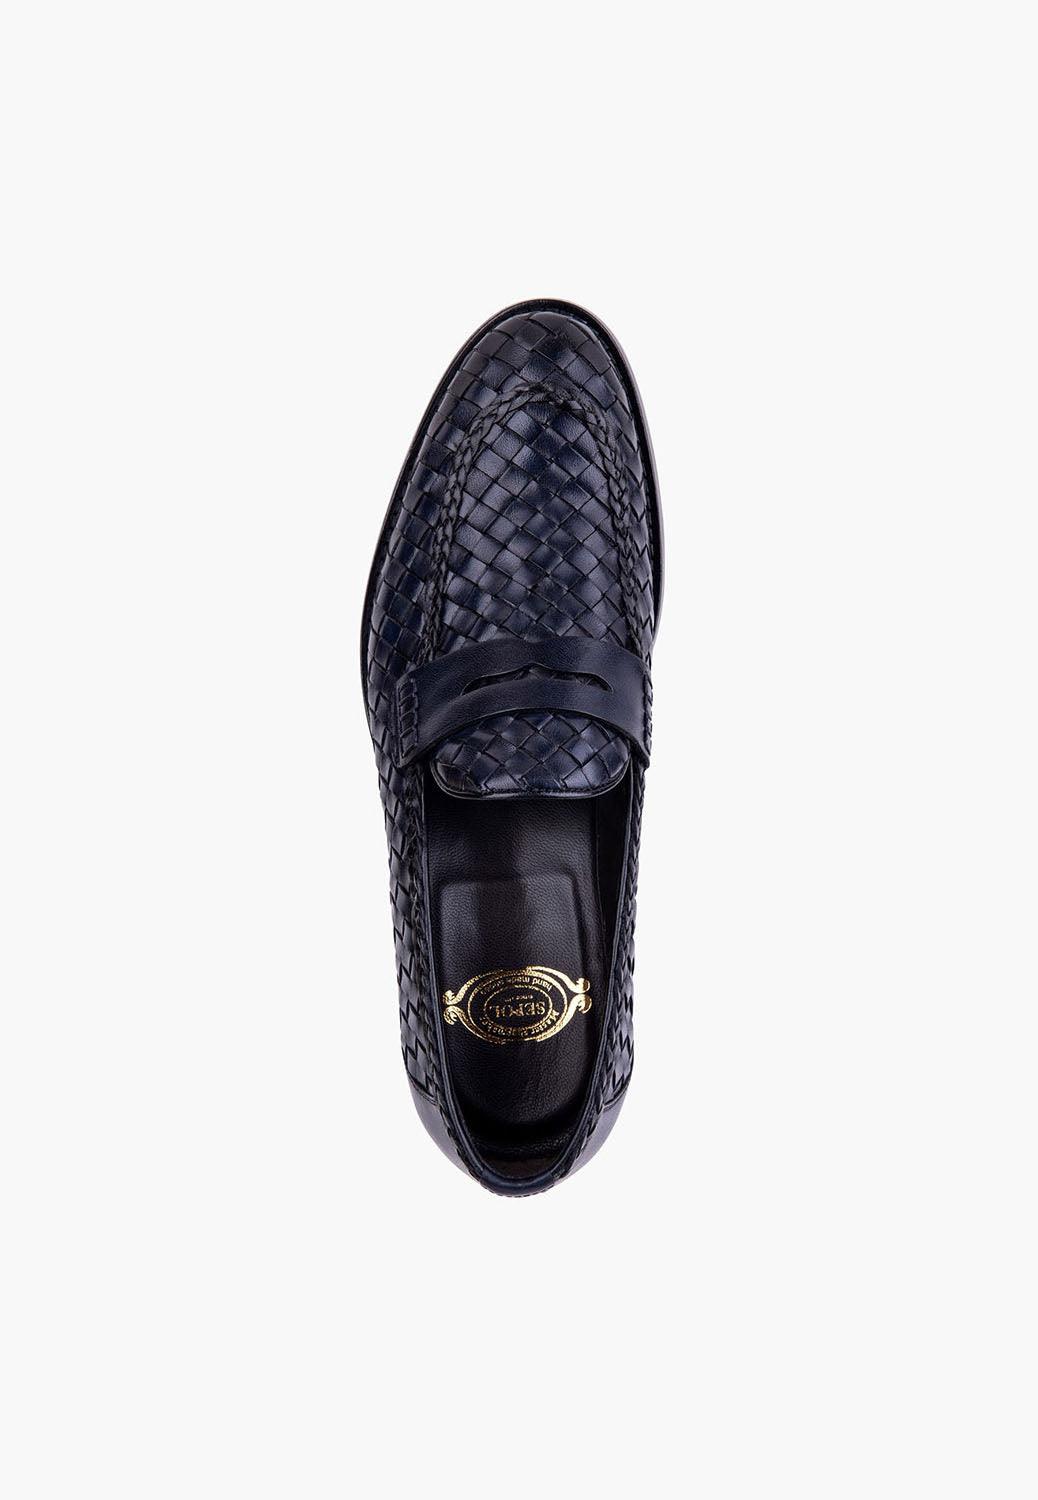 Miami Loafer Navy - SEPOL Shoes